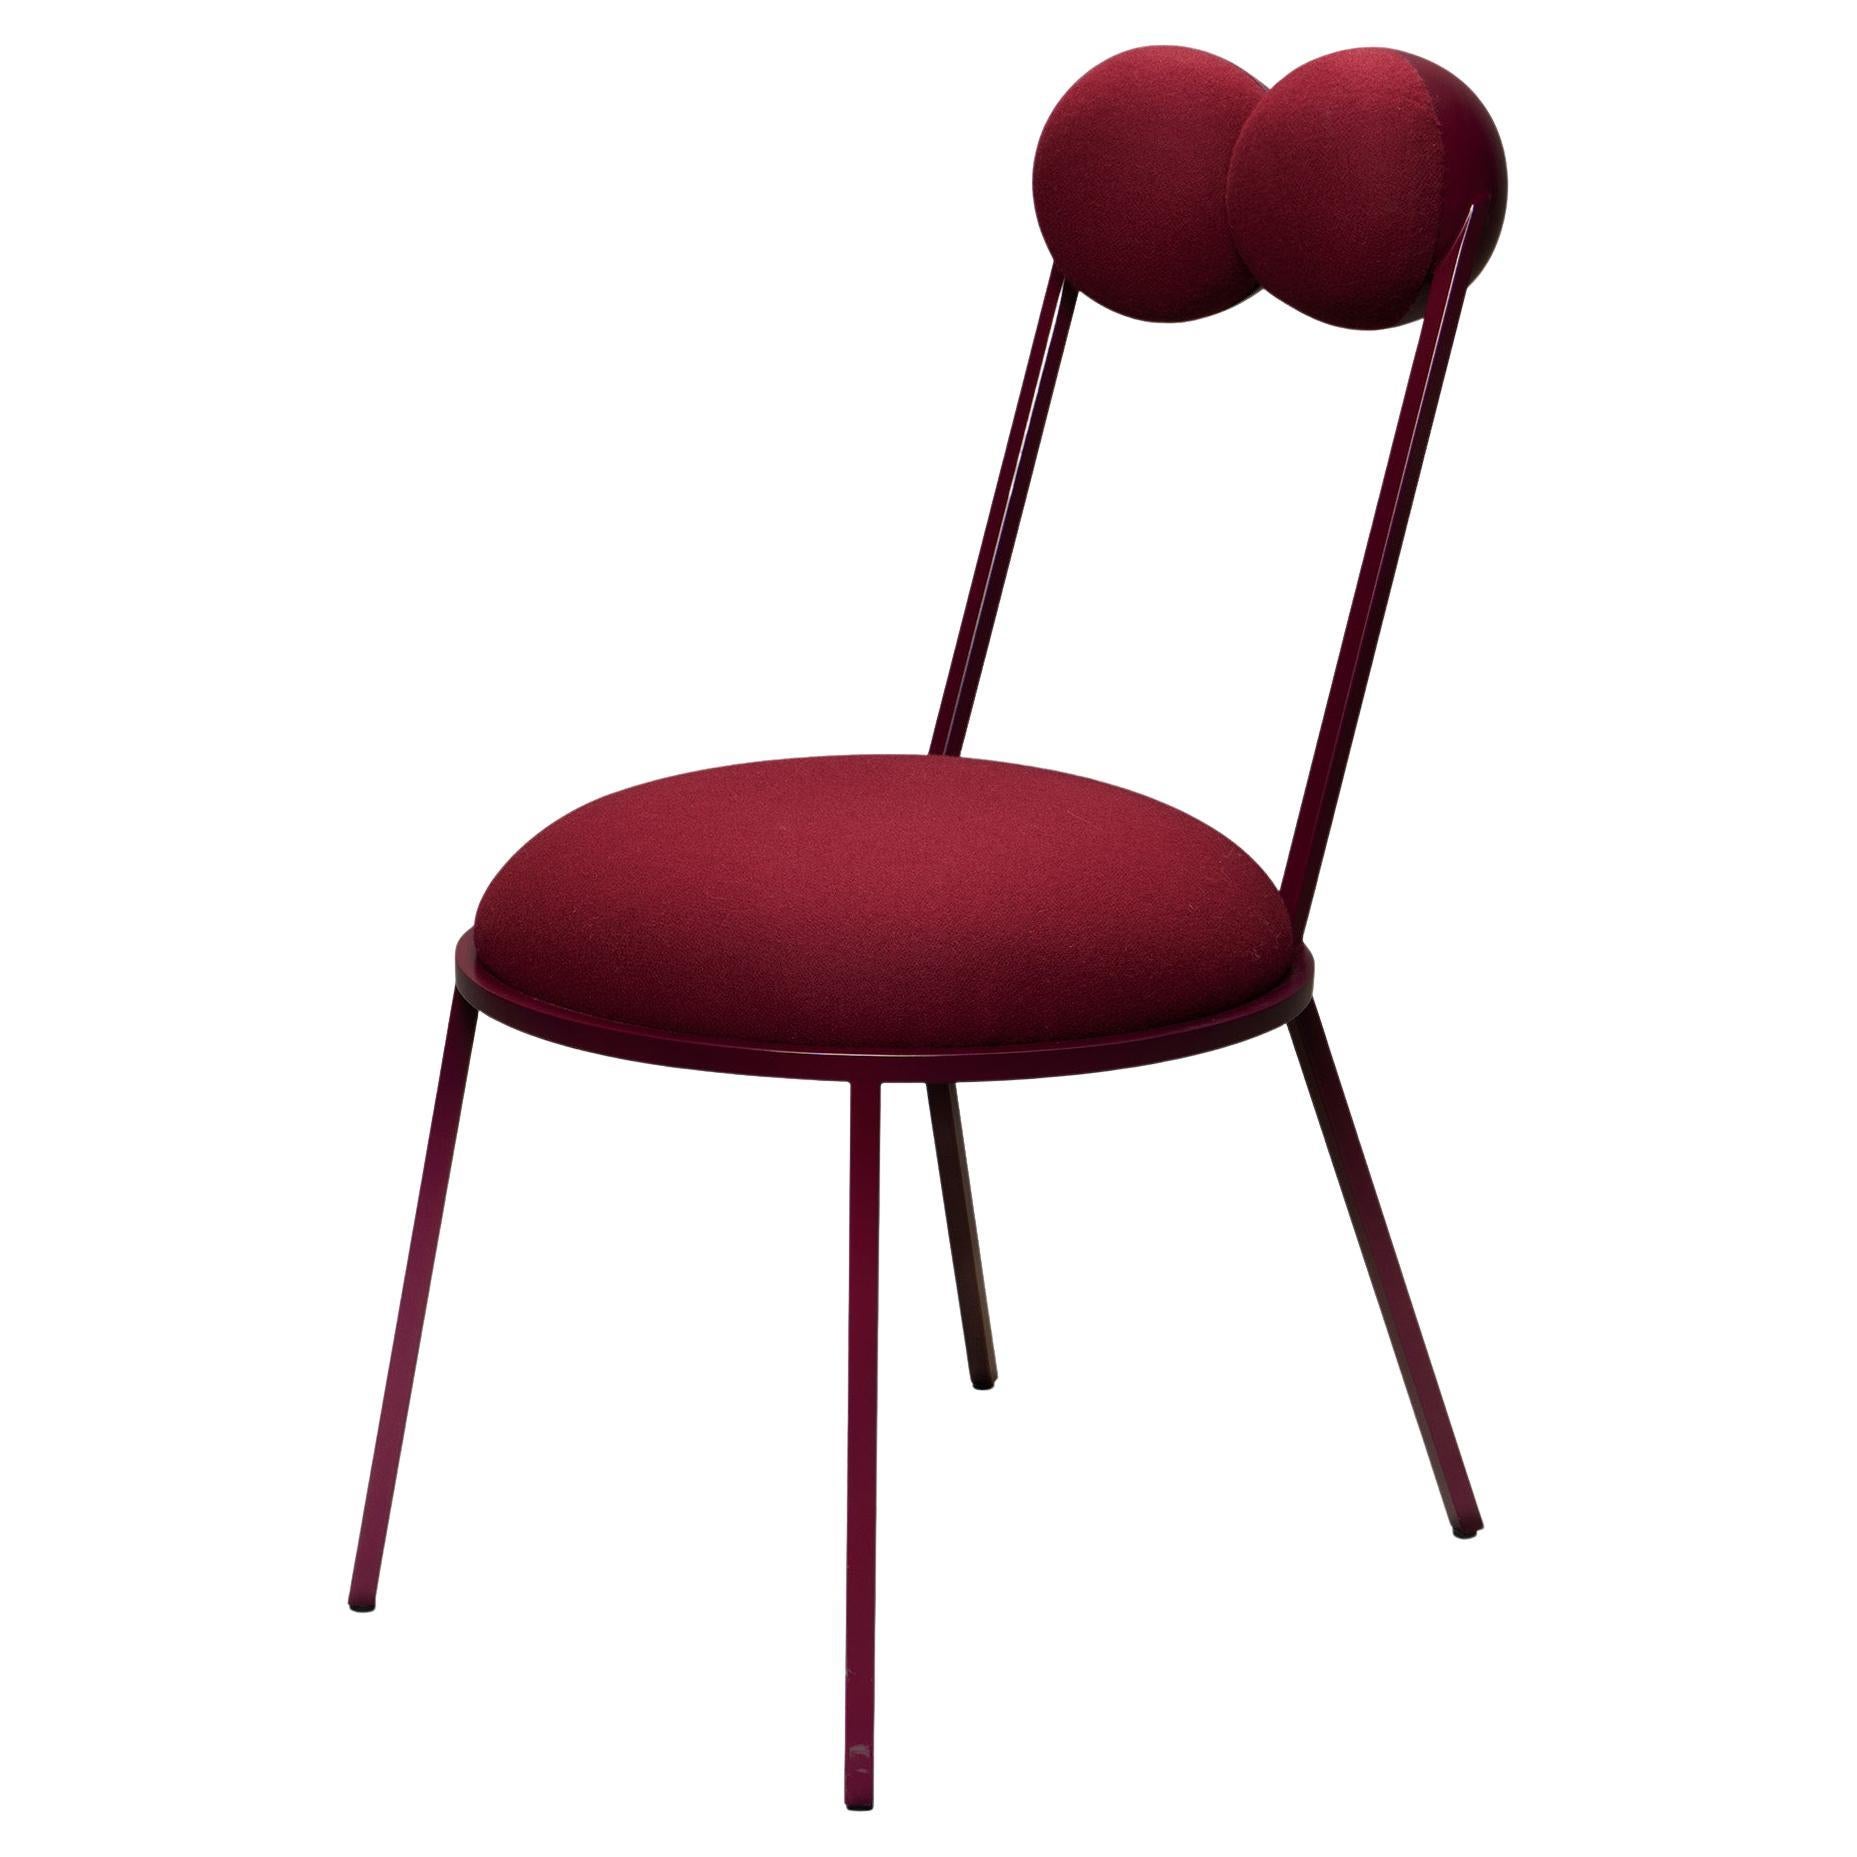 Trevor Chair Dark Red Frame and Wool by Lara Bohinc in Stock